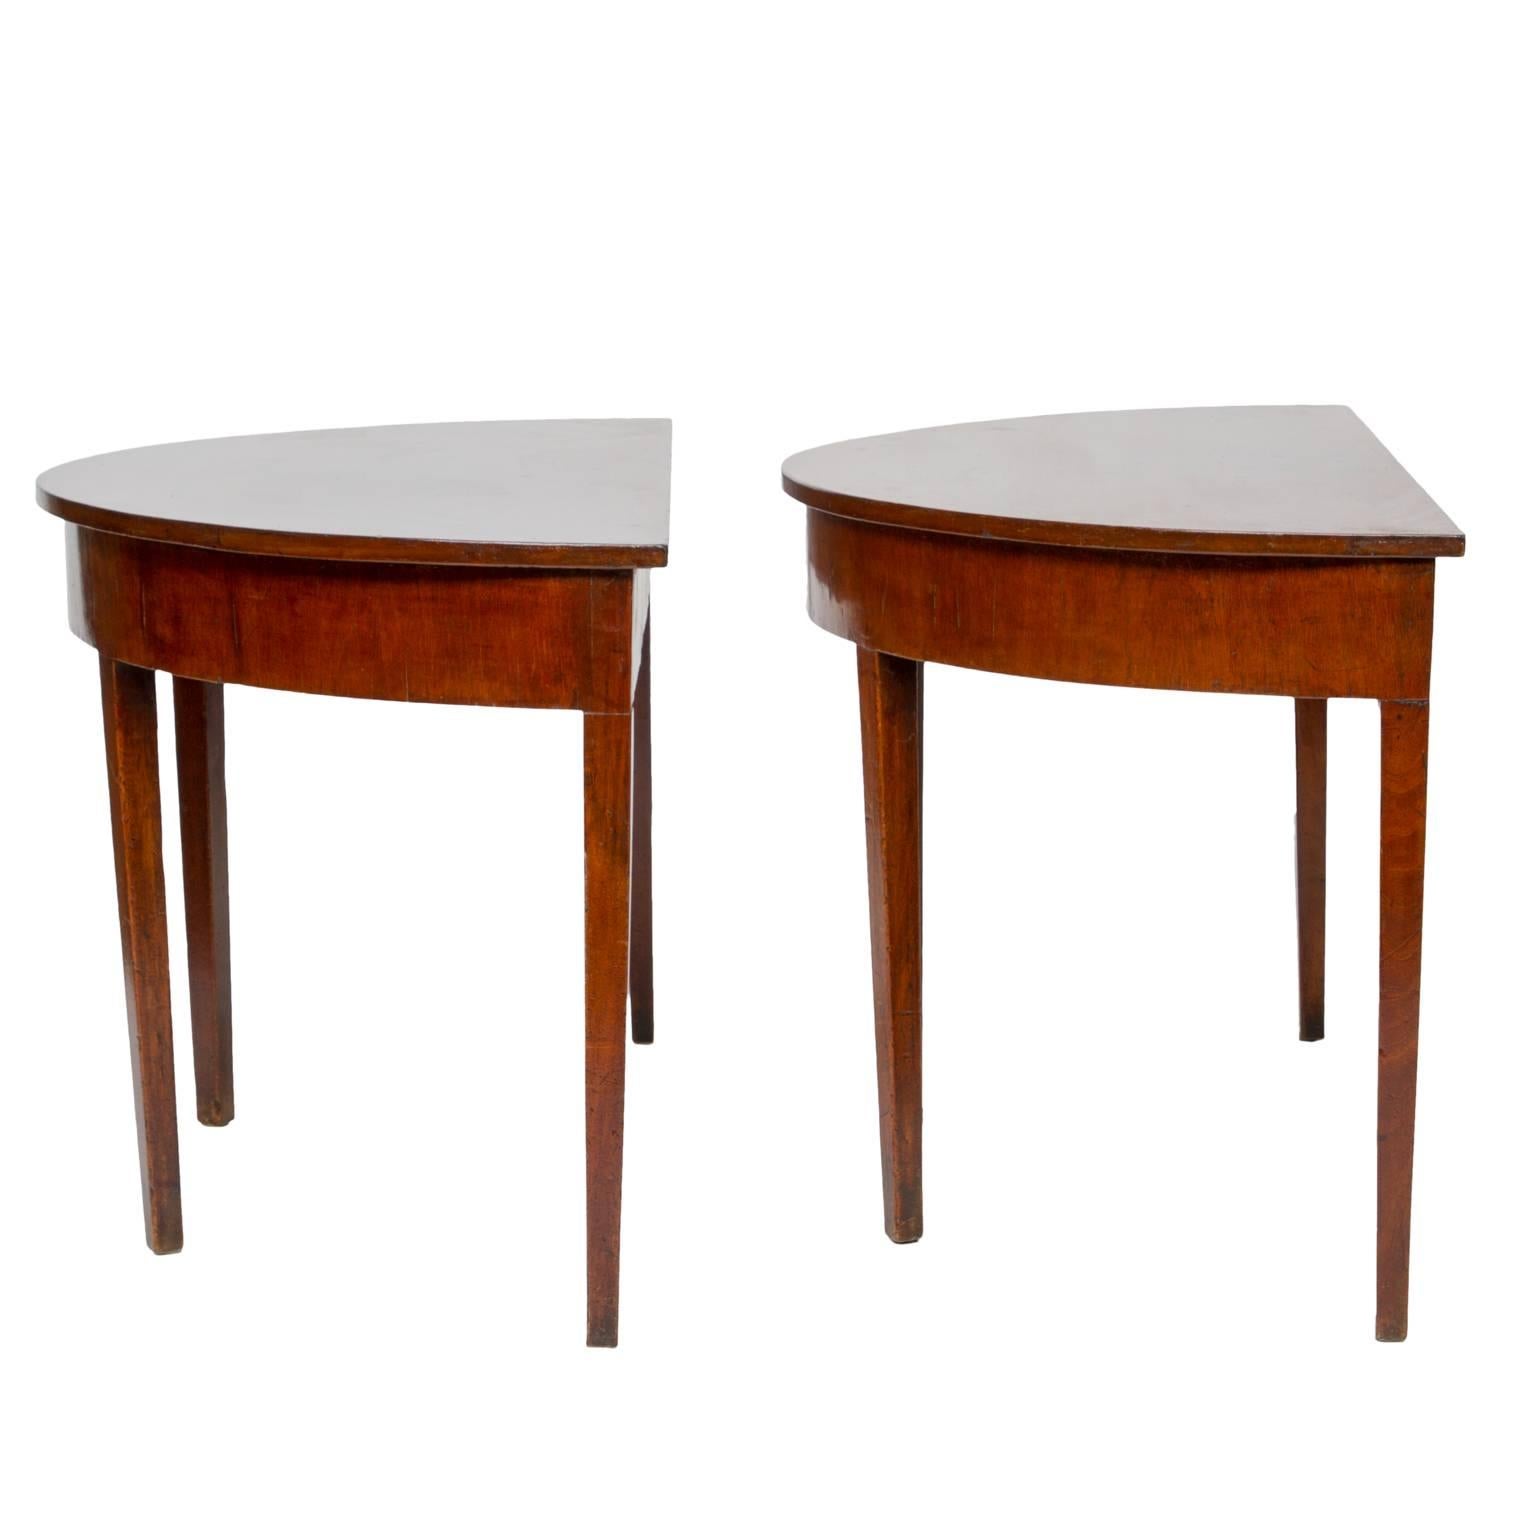 19th century pair of English demilune consoles
A pair of simple demilune mahogany consoles. Beautiful variations of color. Straight tapered legs. There are markings on the top, we can remove only by request. The patina is so nice, we don't want to